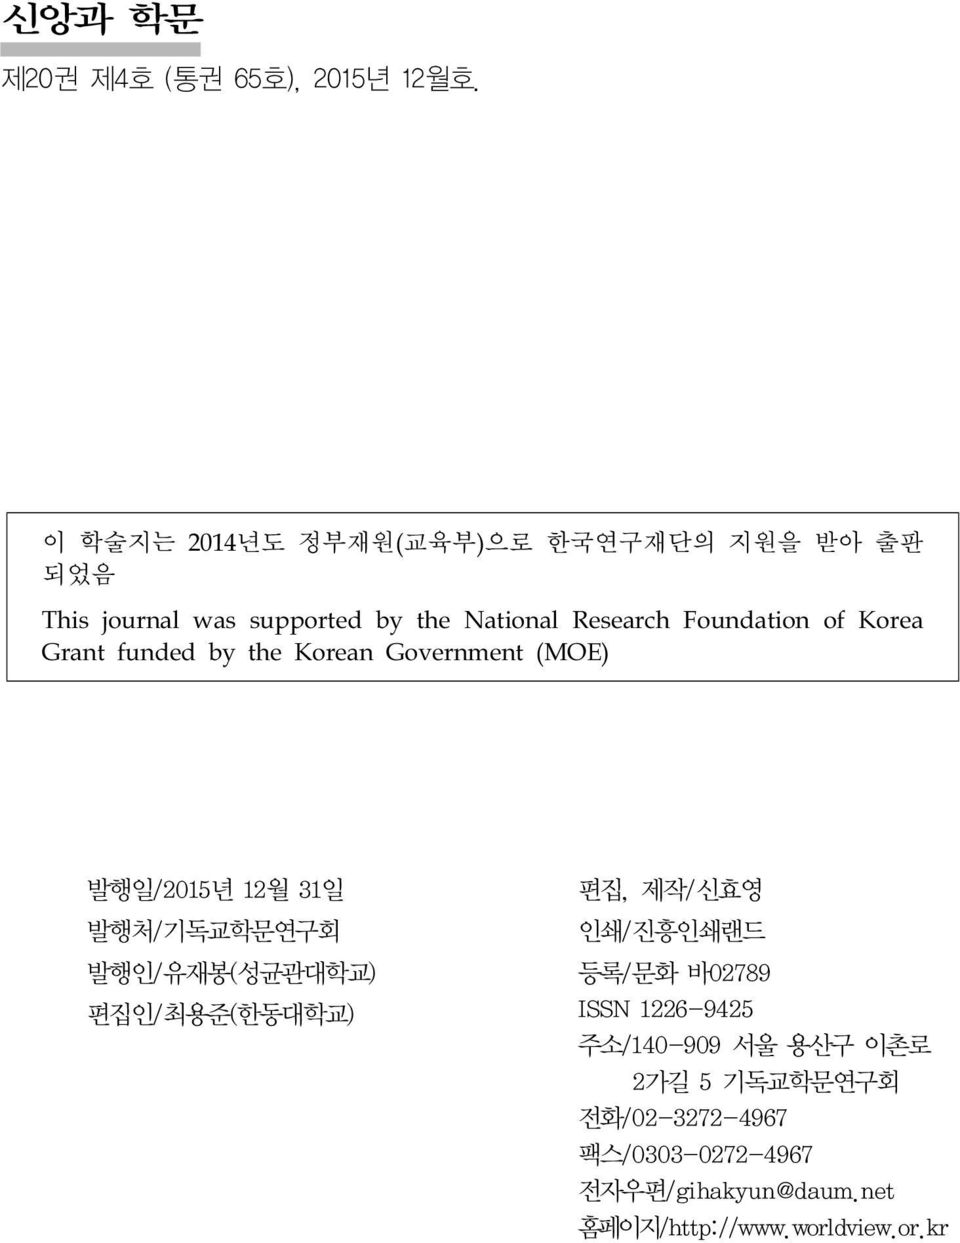 Foundation of Korea Grant funded by the Korean Government (MOE) 발행일/2015년 12월 31일 발행처/기독교학문연구회